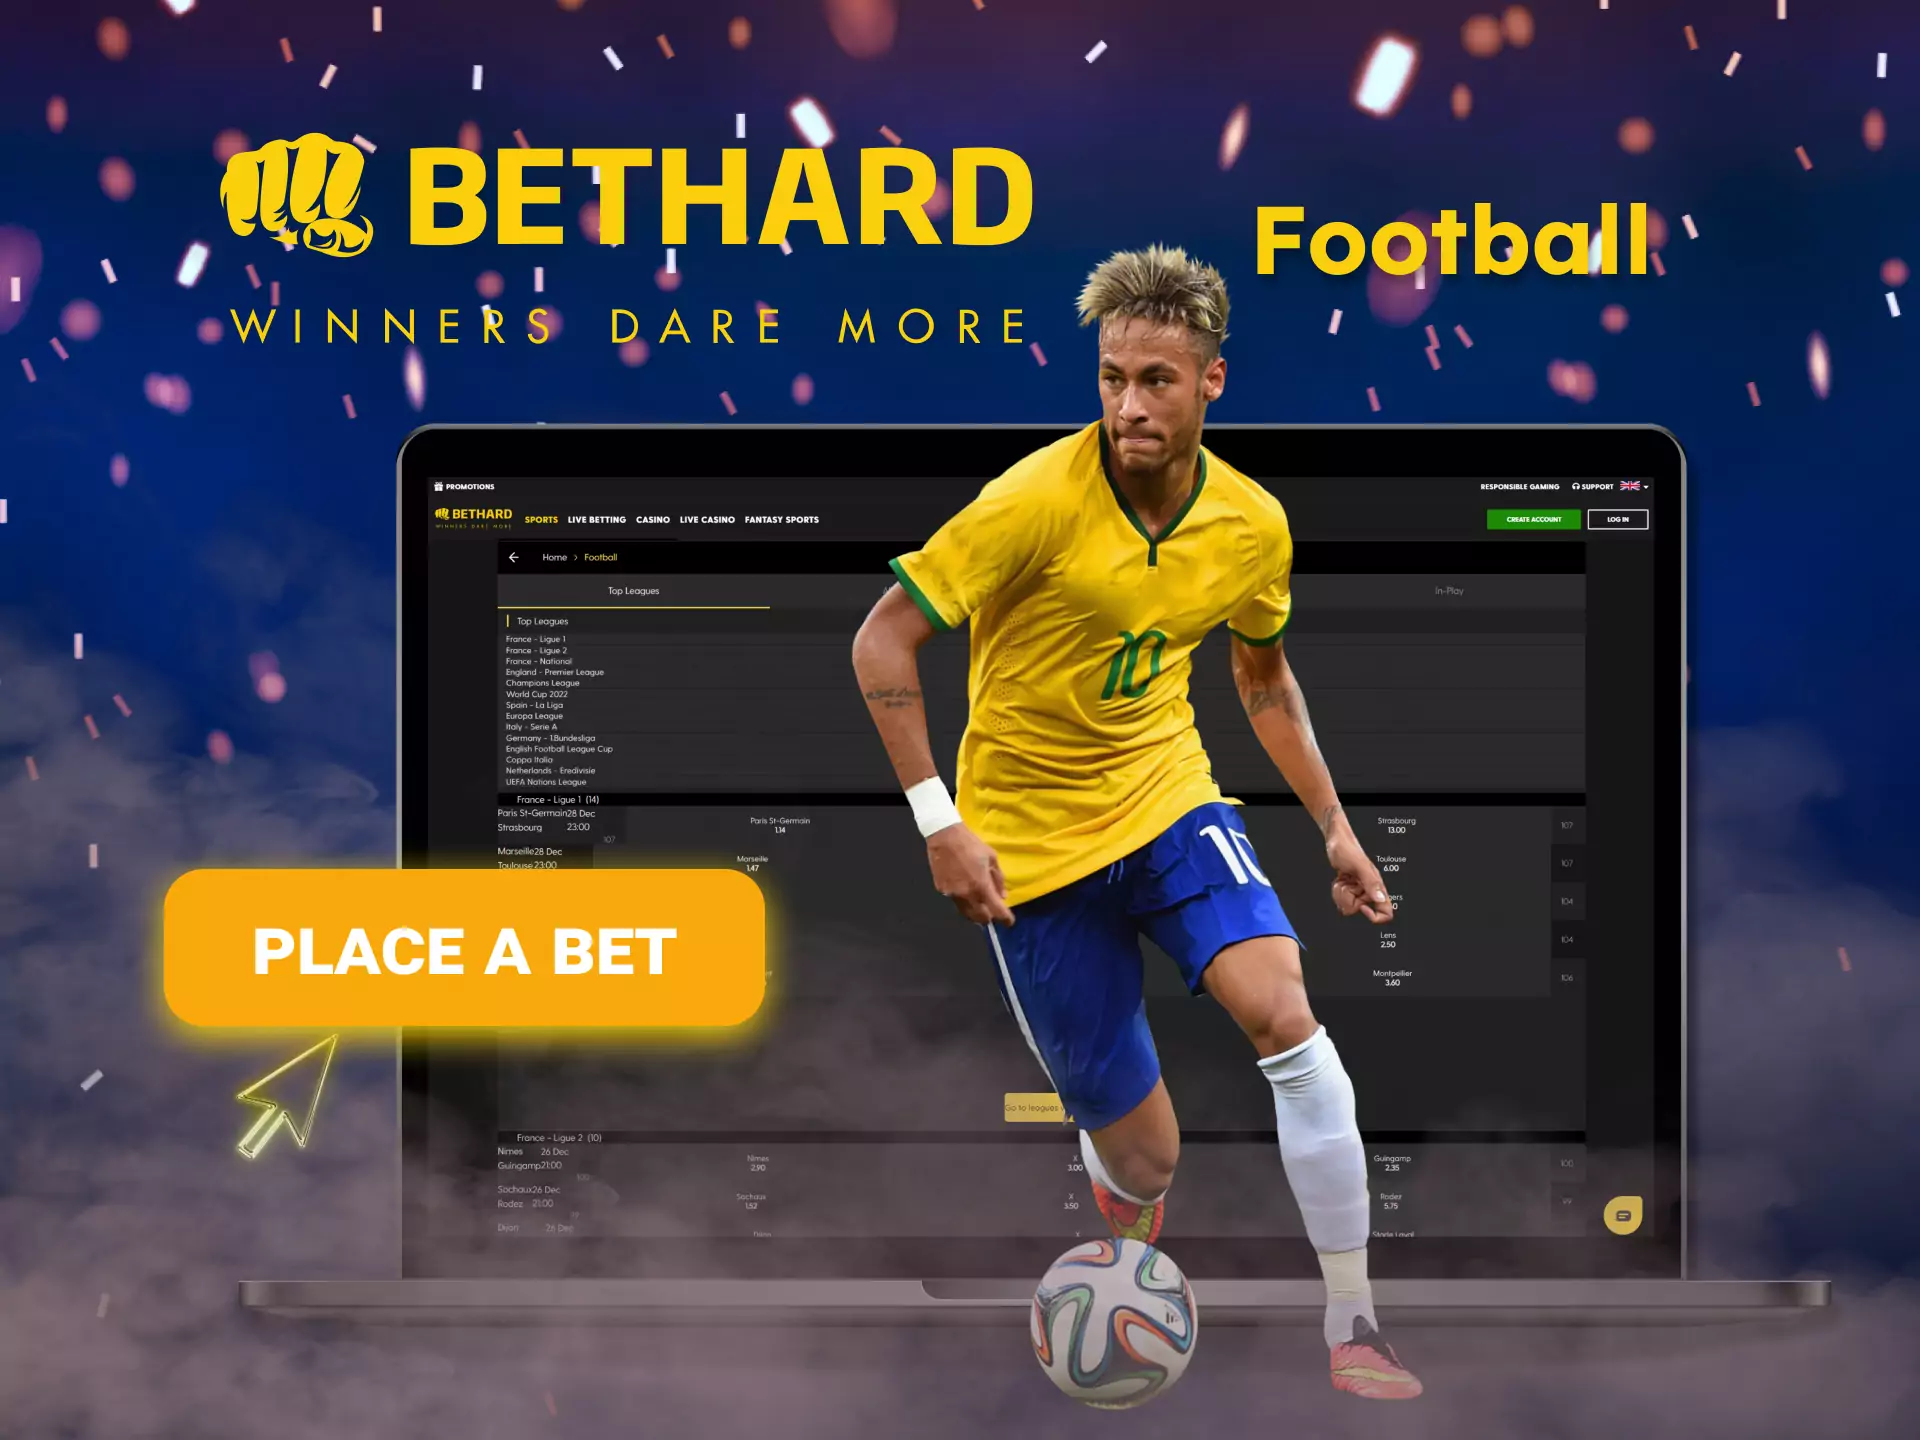 Place bets on your favorite football team with Bethard.